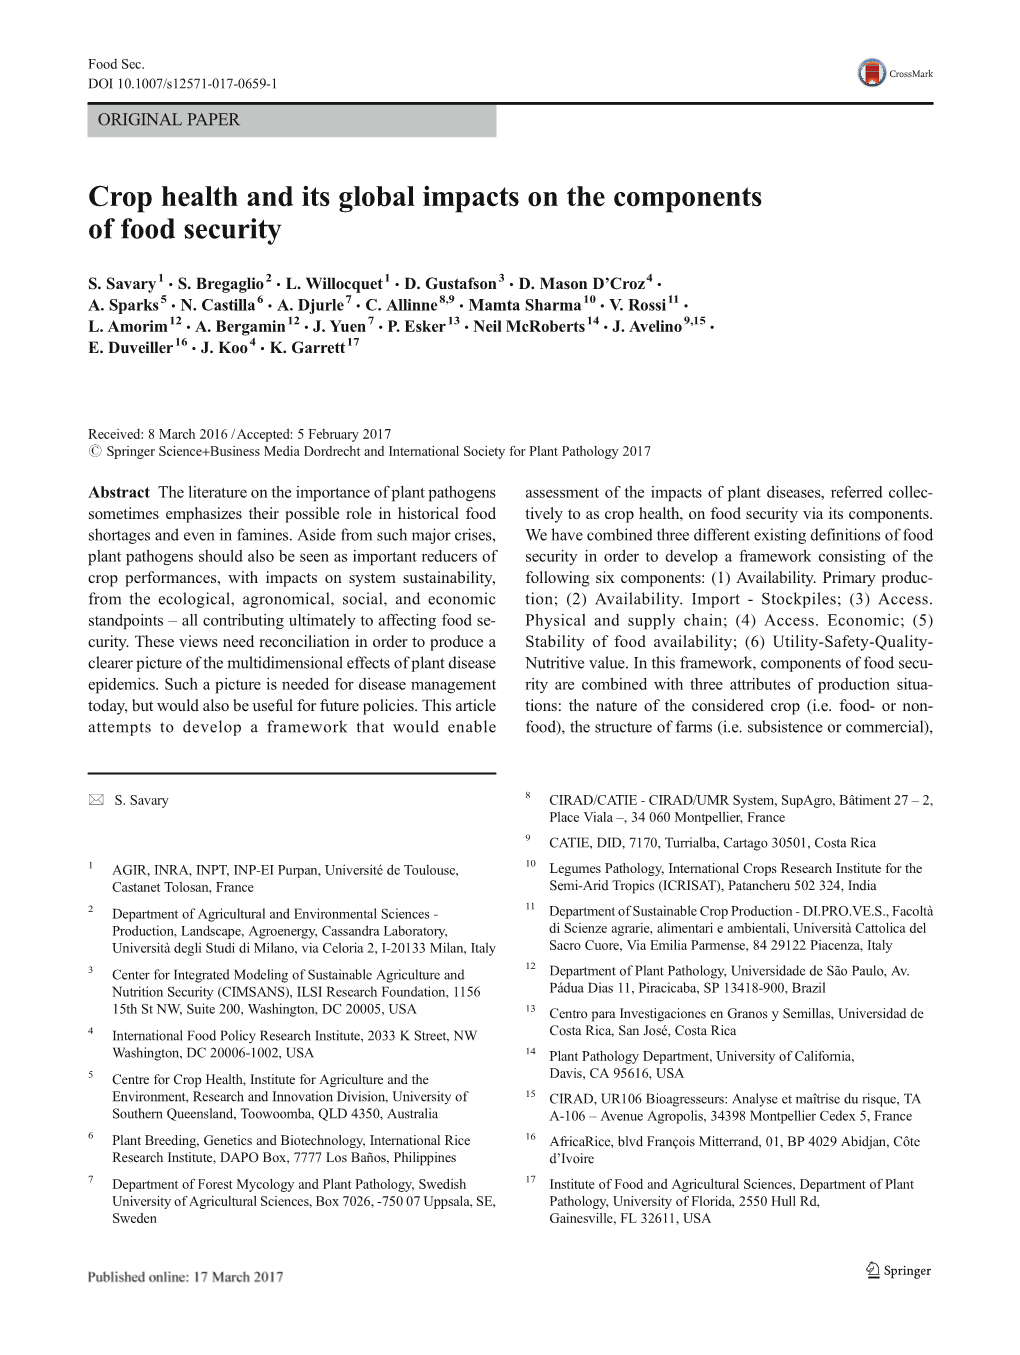 Crop Health and Its Global Impacts on the Components of Food Security